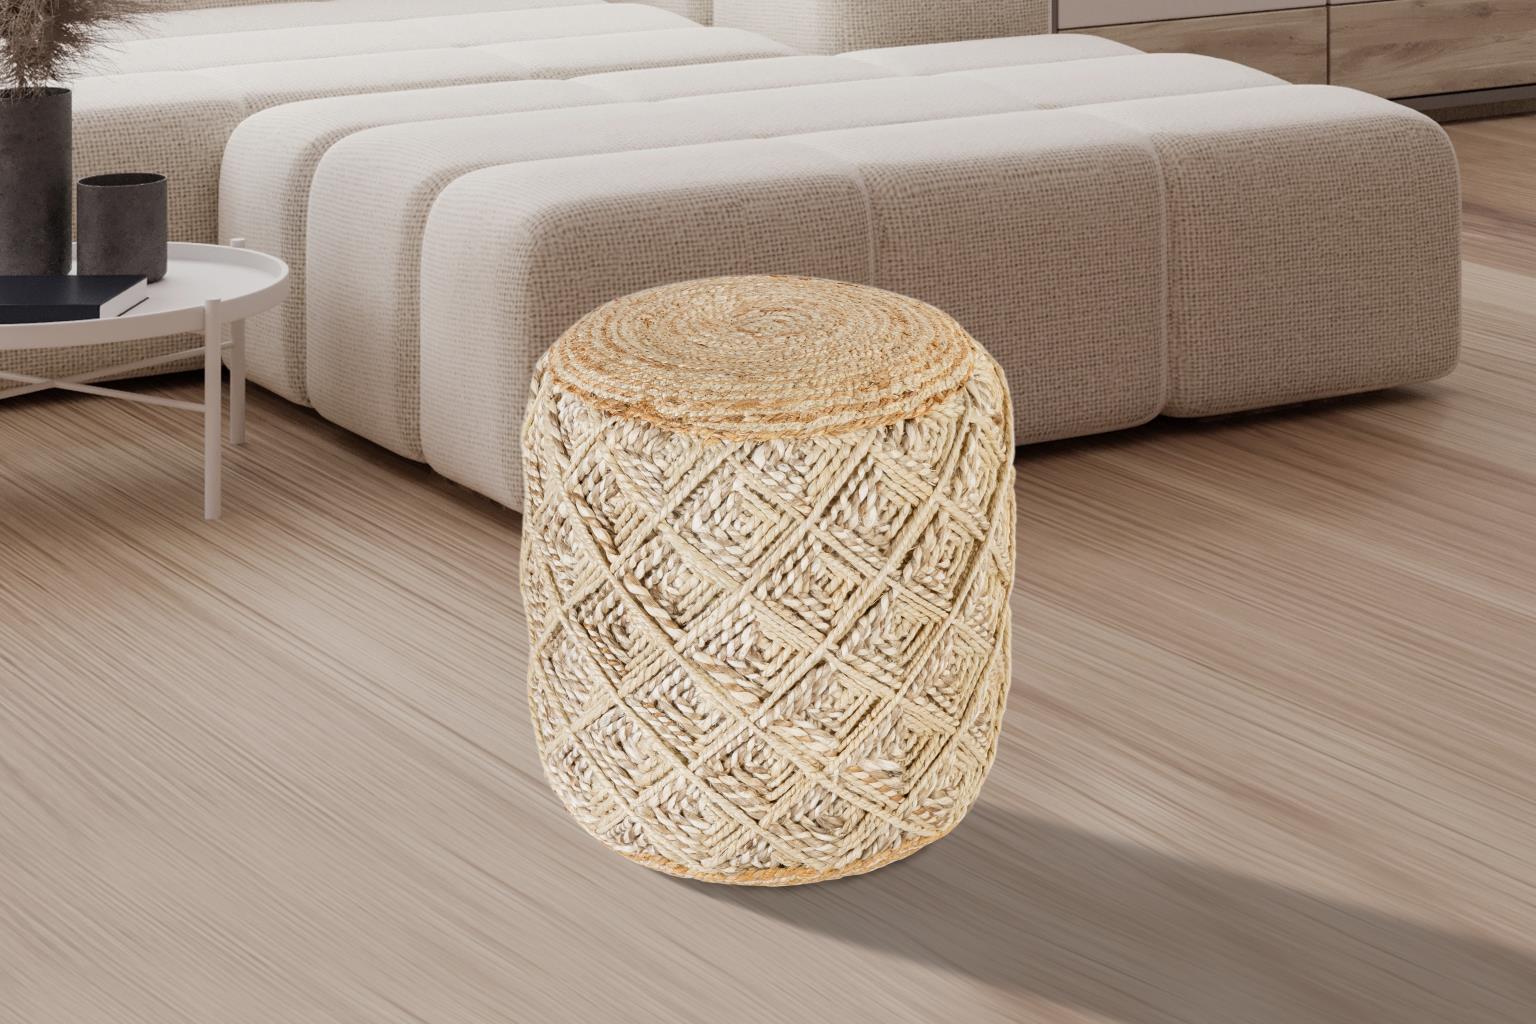 Modern Ottoman 2900 Pouf 718852652291 718852652291 in Natural, White Fabric